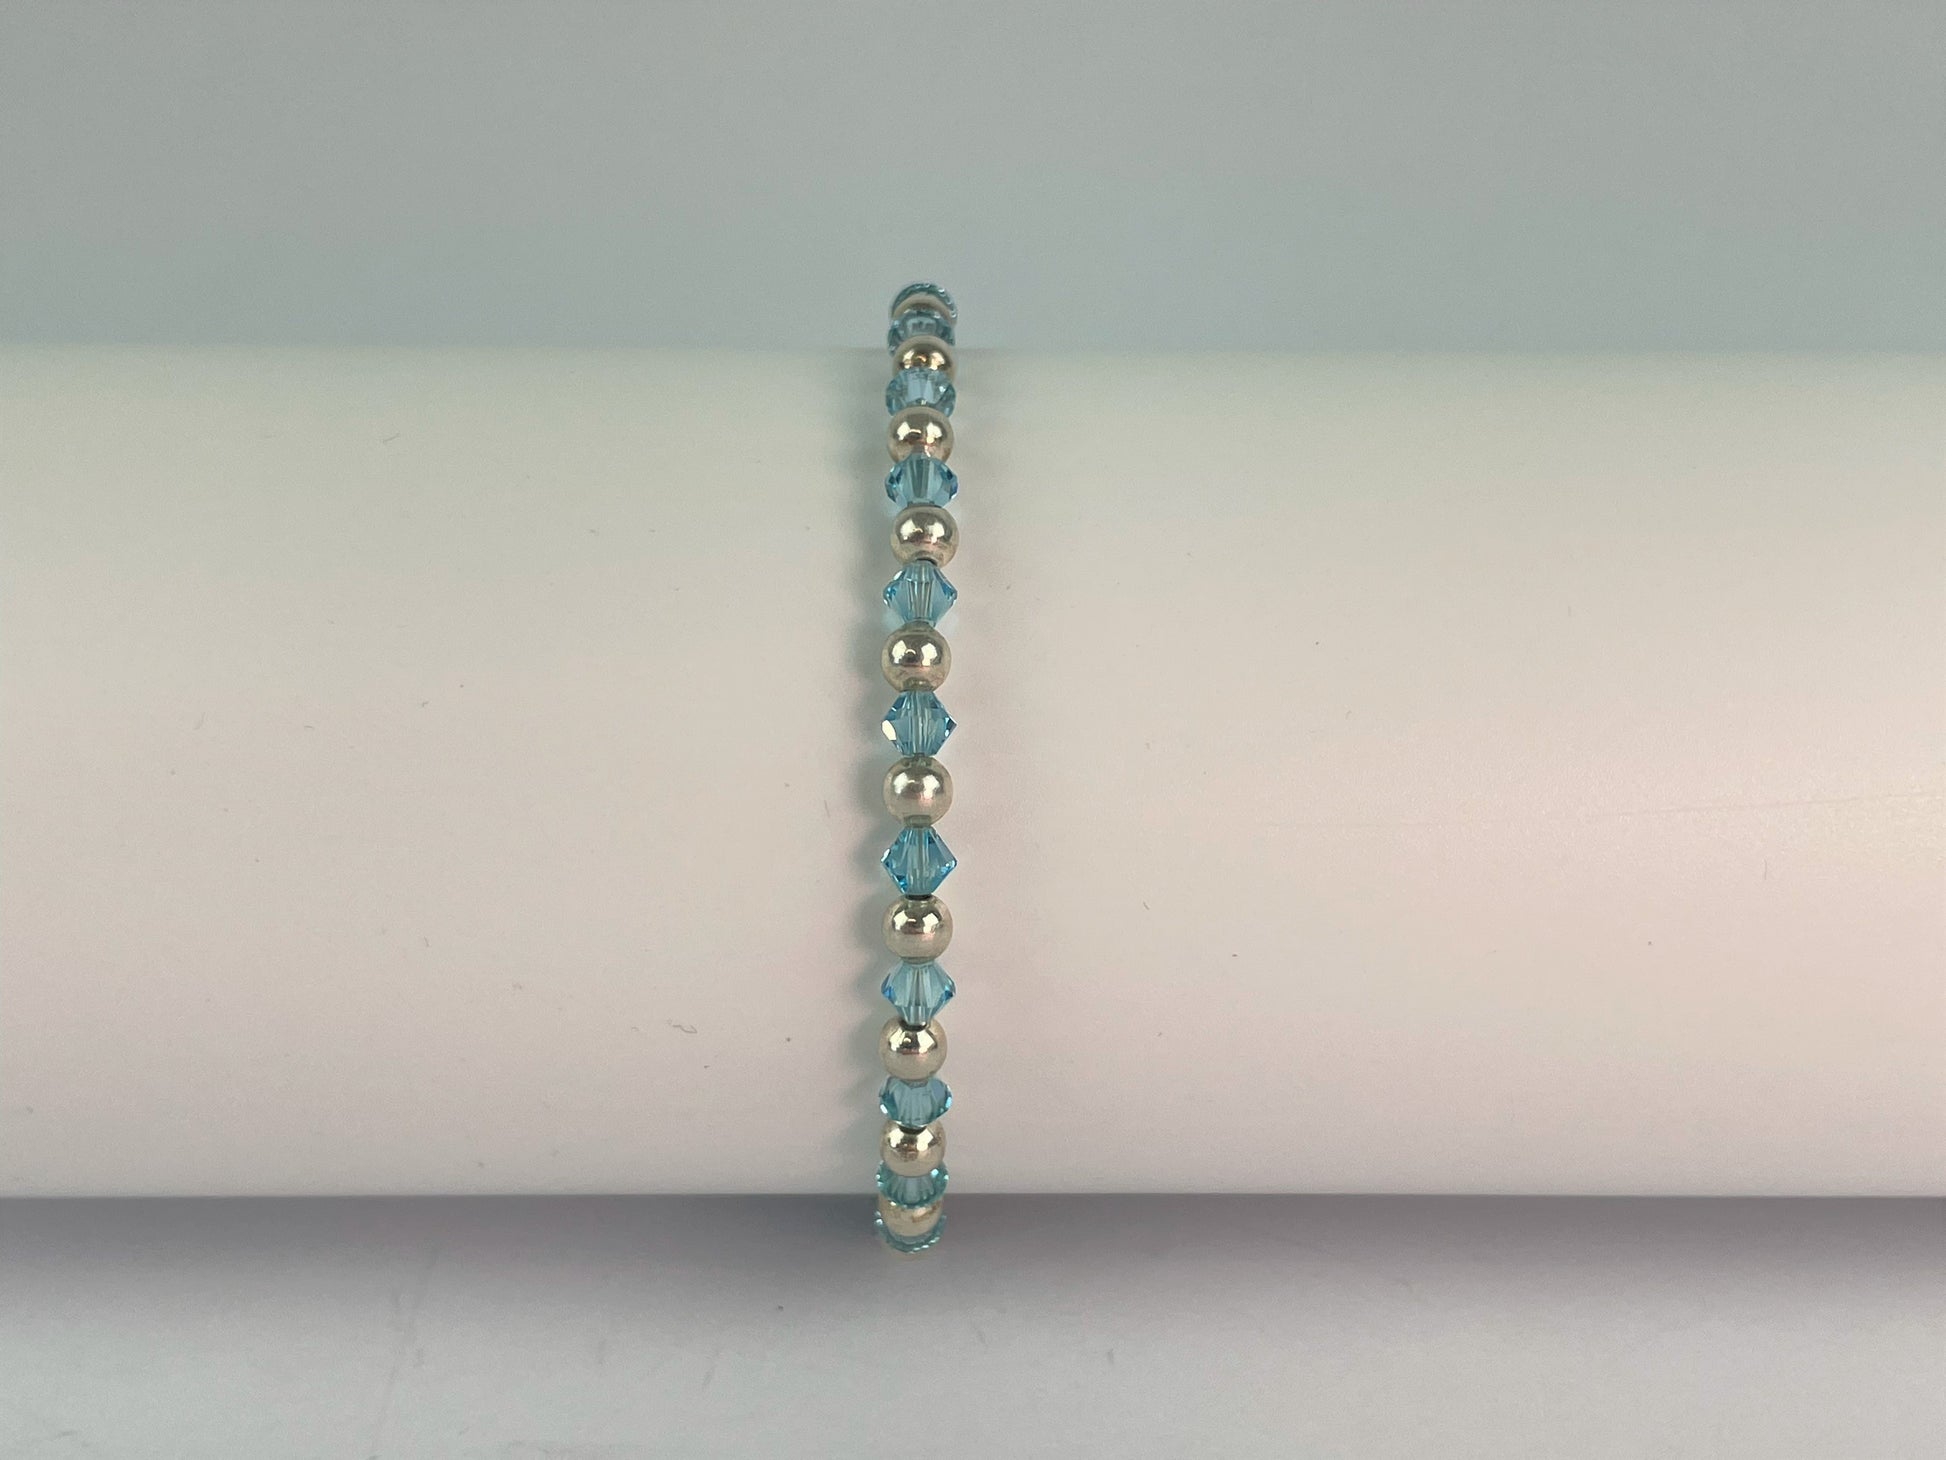 sky blue crystals and silver plated beads make up this pretty blue bracelet.